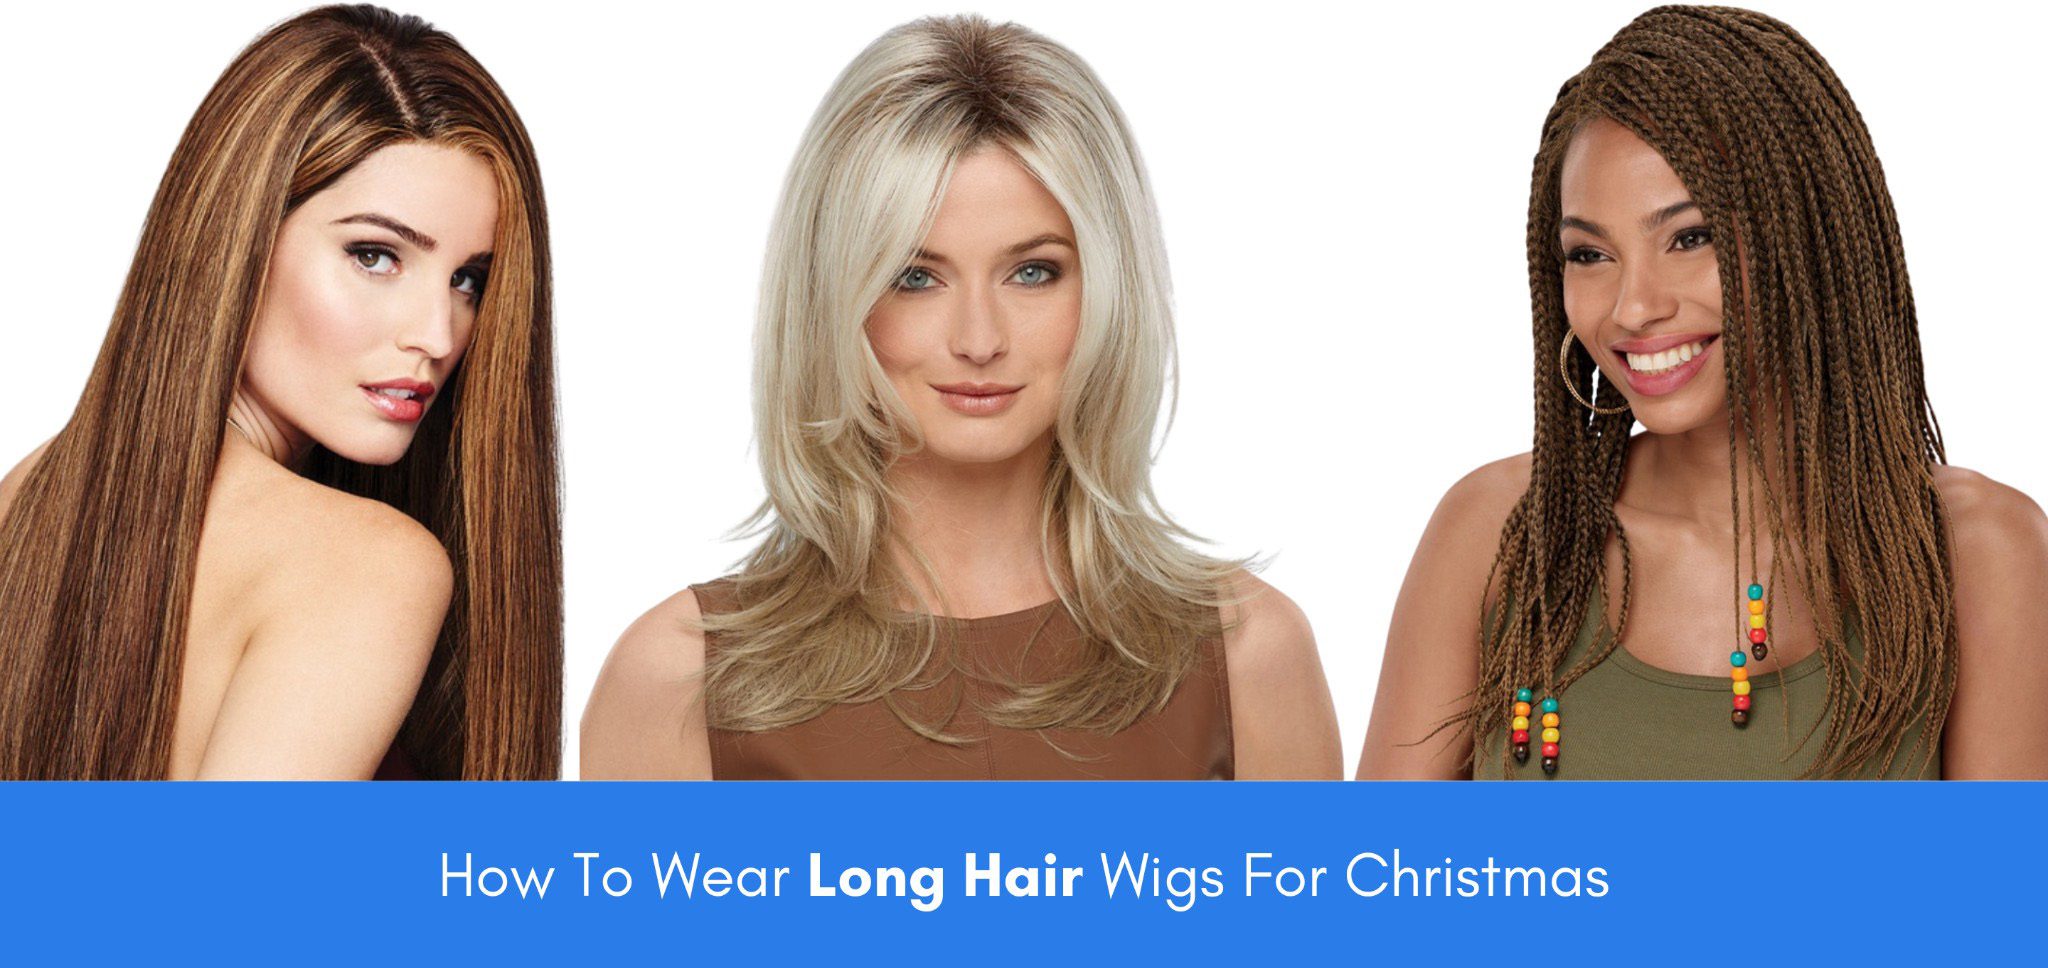 how to wear long hair wigs for christmas